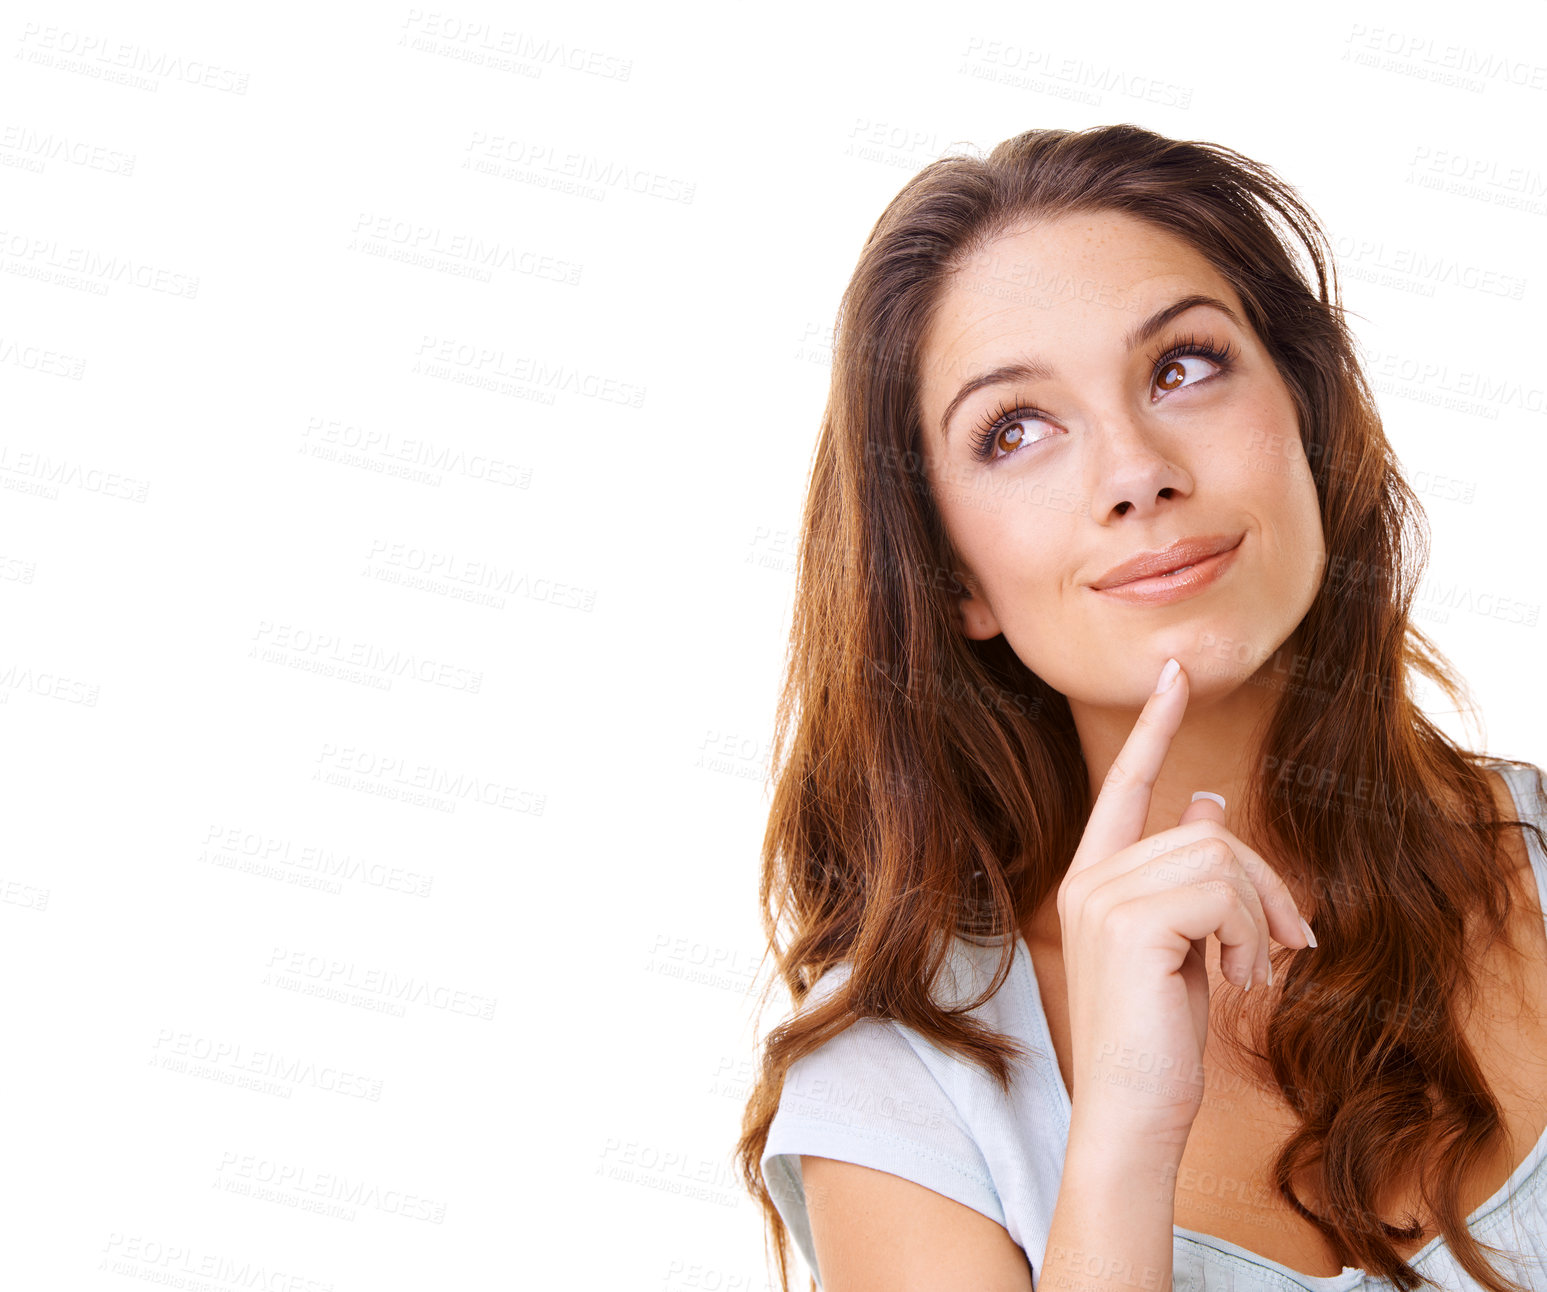 Buy stock photo A young woman thinking against a white background